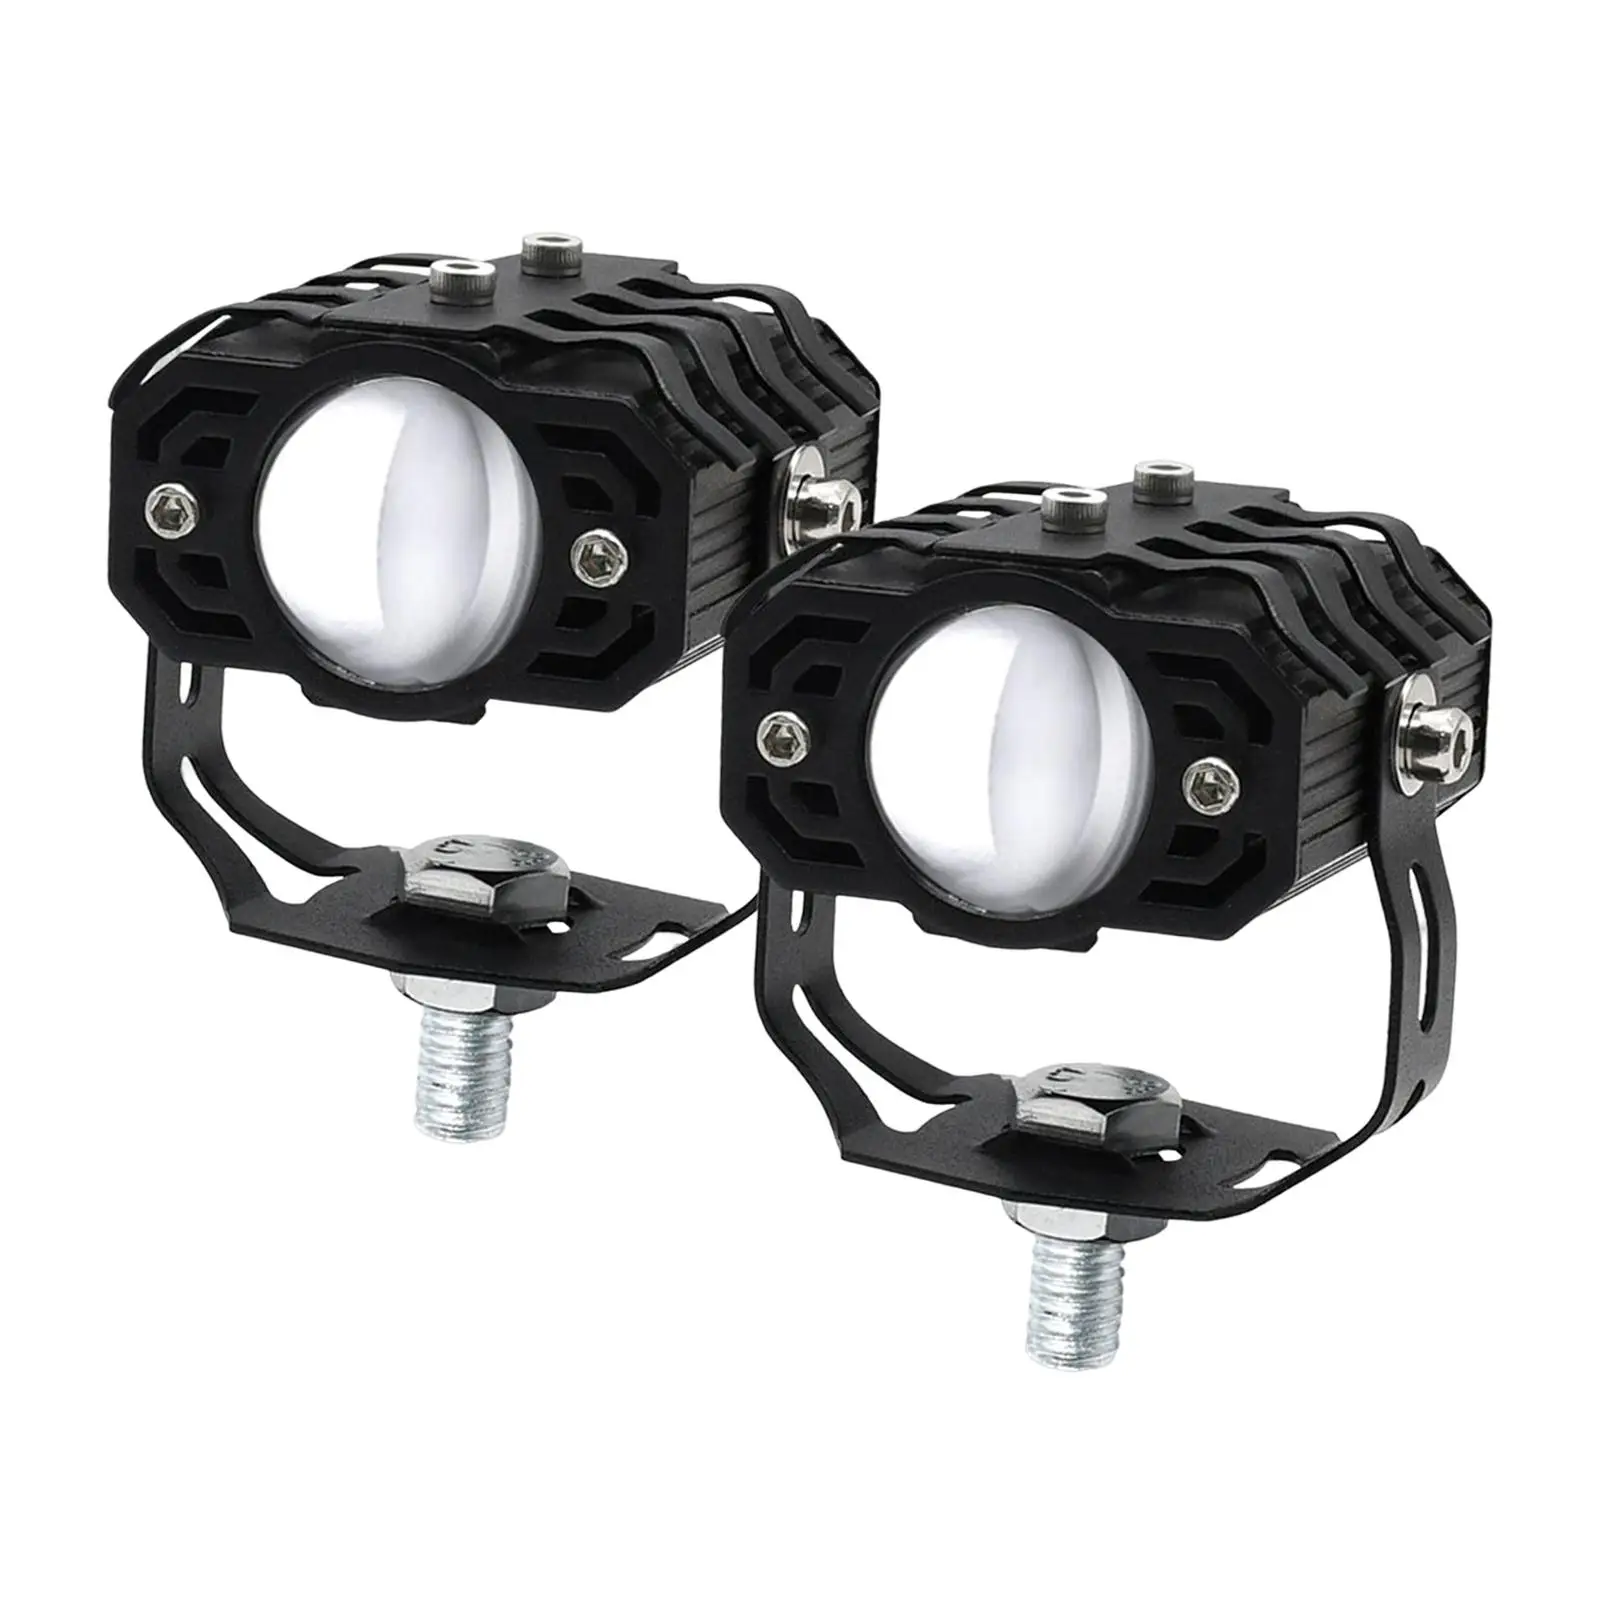 2x Motorcycle Auxiliary Driving Lights Spotlight White Yellow for ATV